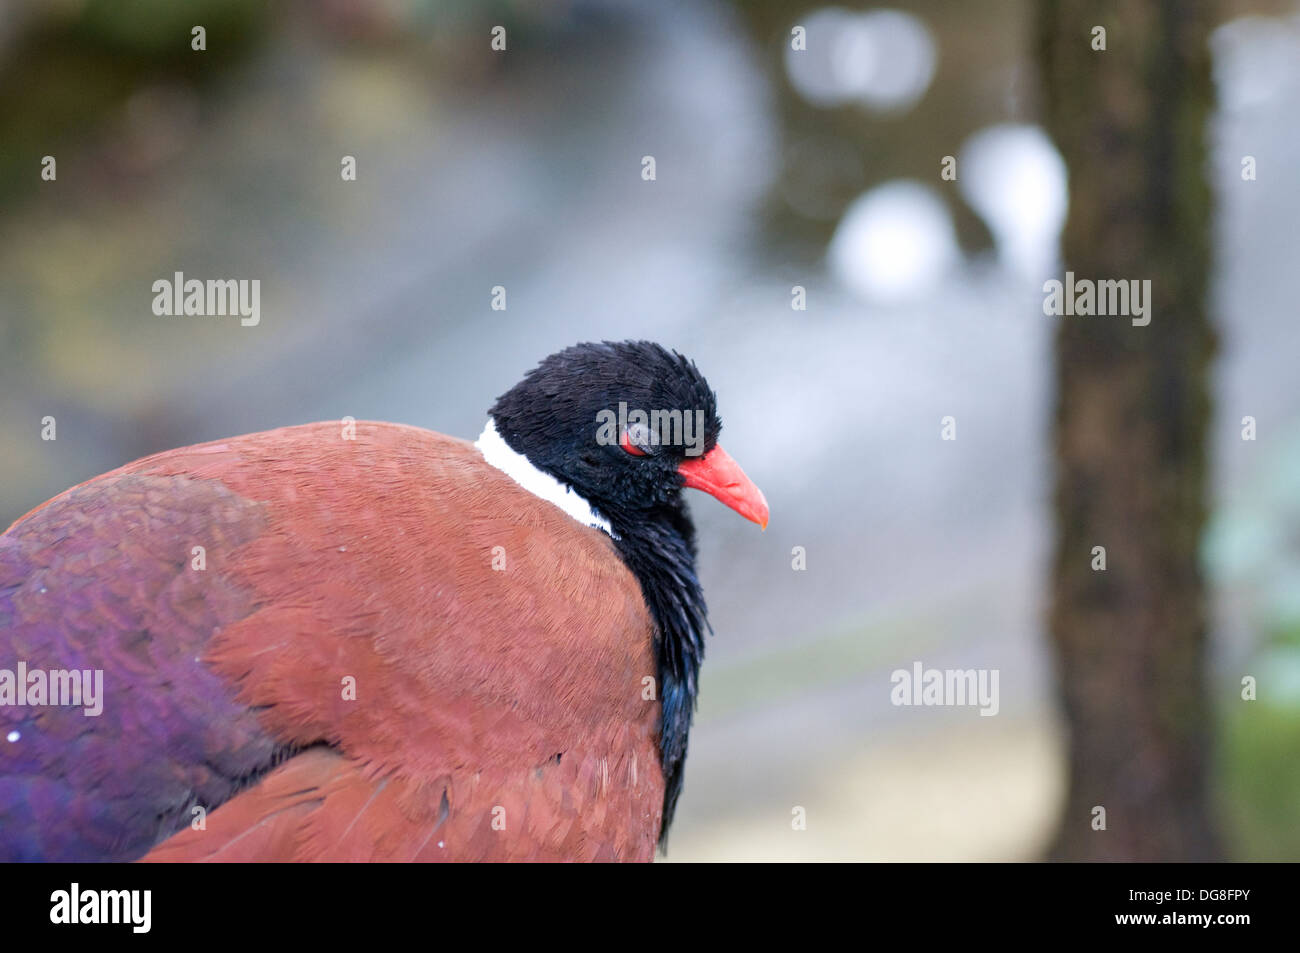 black head red eyes red beak white collar salmon wings and back purple florescent back and pigeon like bird as yet unidentified Stock Photo